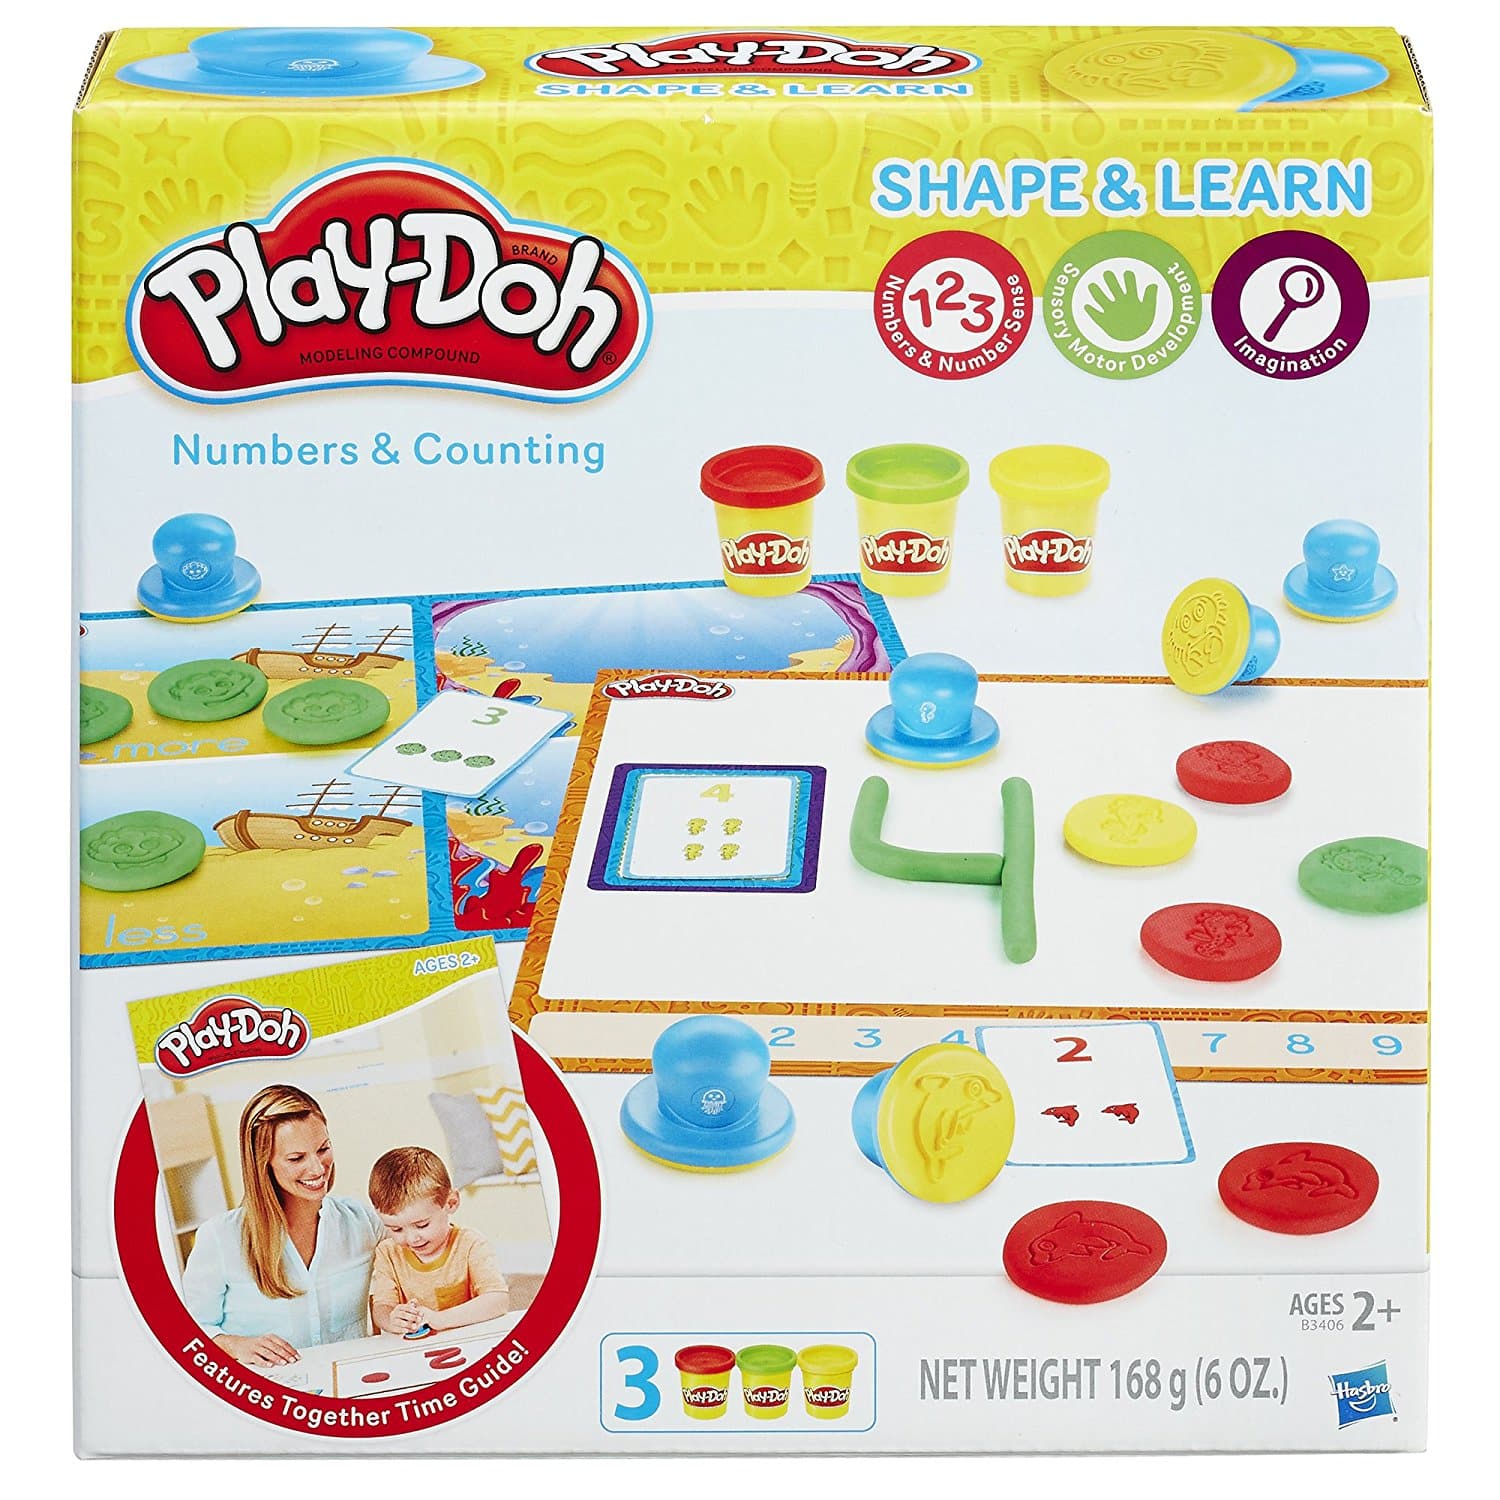 DEAL ALERT: Play-Doh Shape and Learn Numbers and Counting – 46% off!